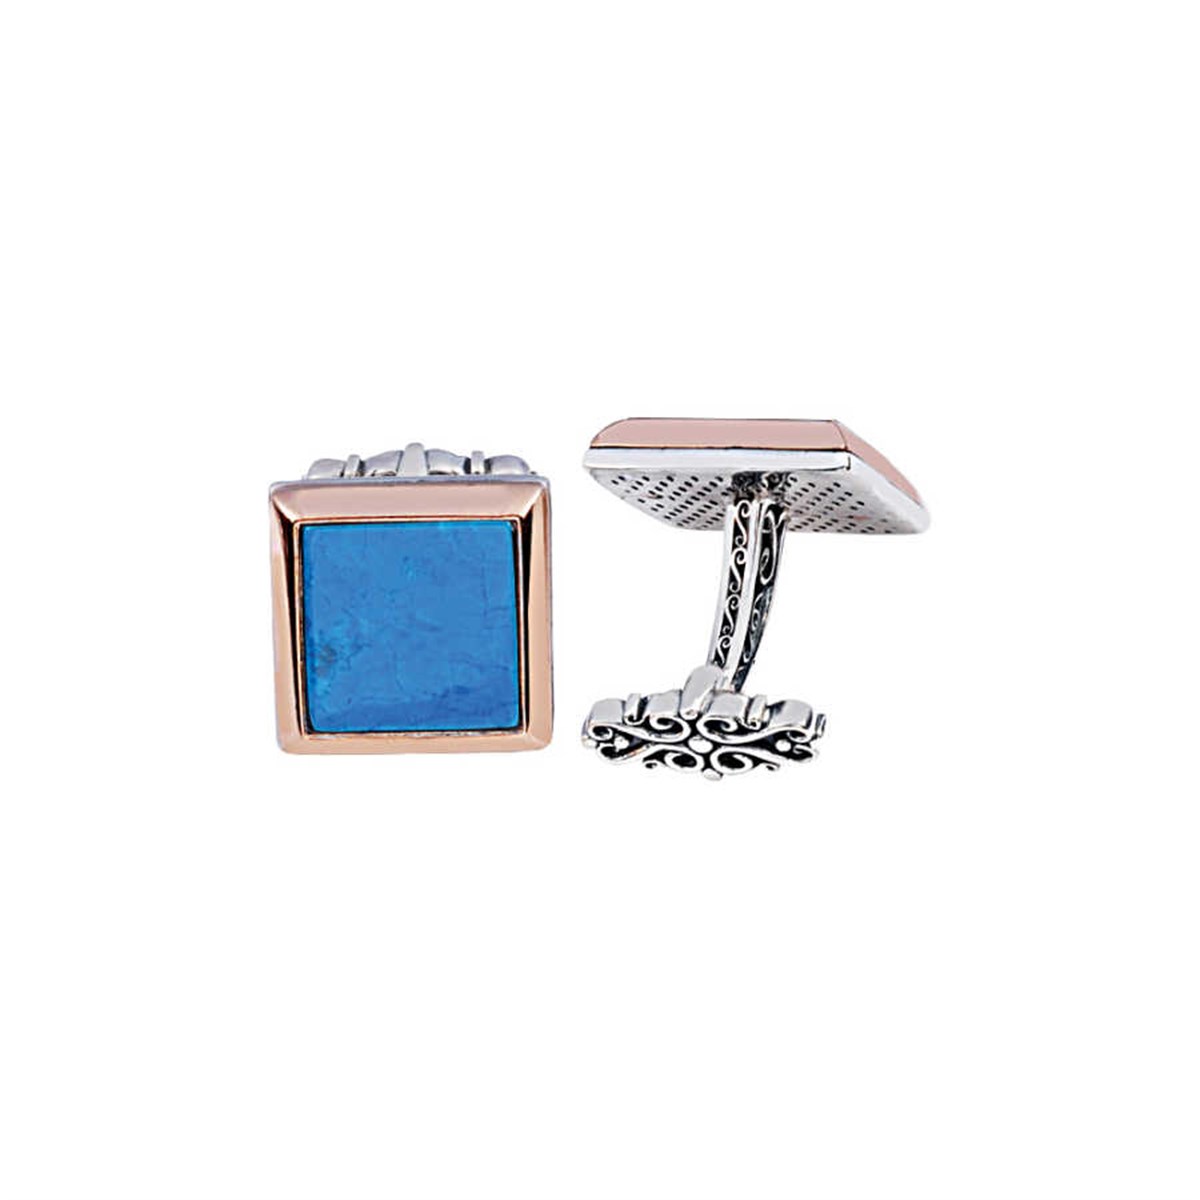 Silver Turquoise Stone Square Cufflink